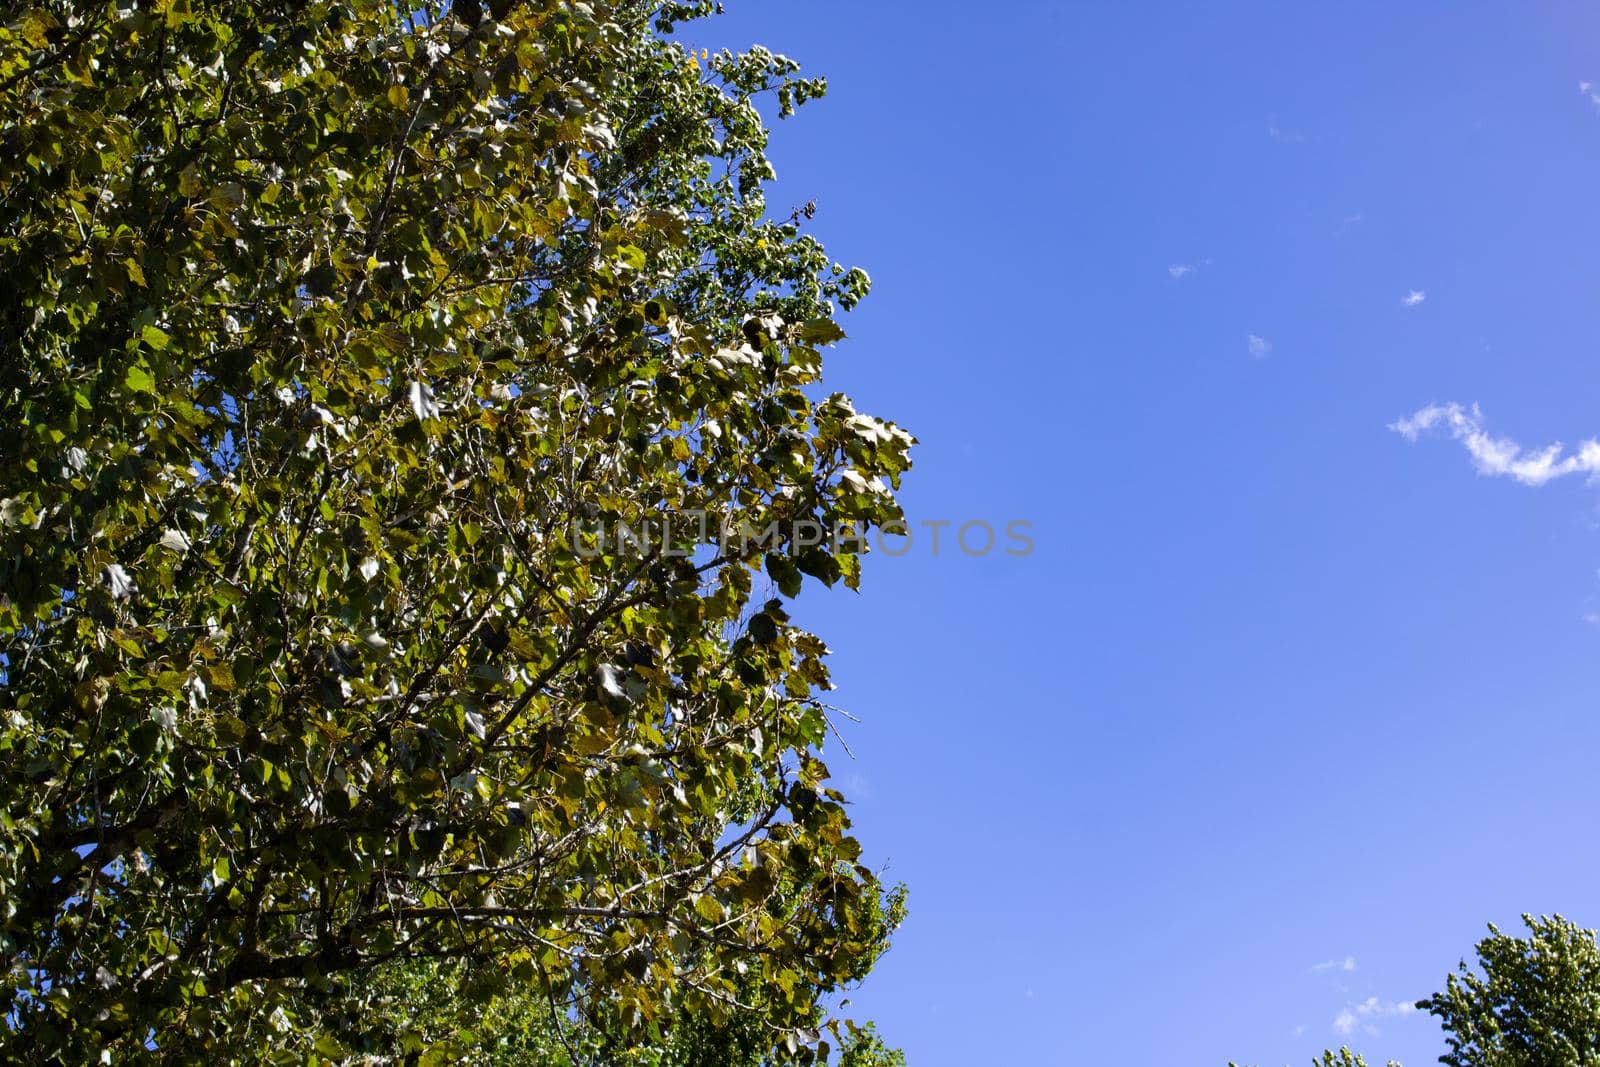 Green leaves on tree branches against blue sky by Vera1703